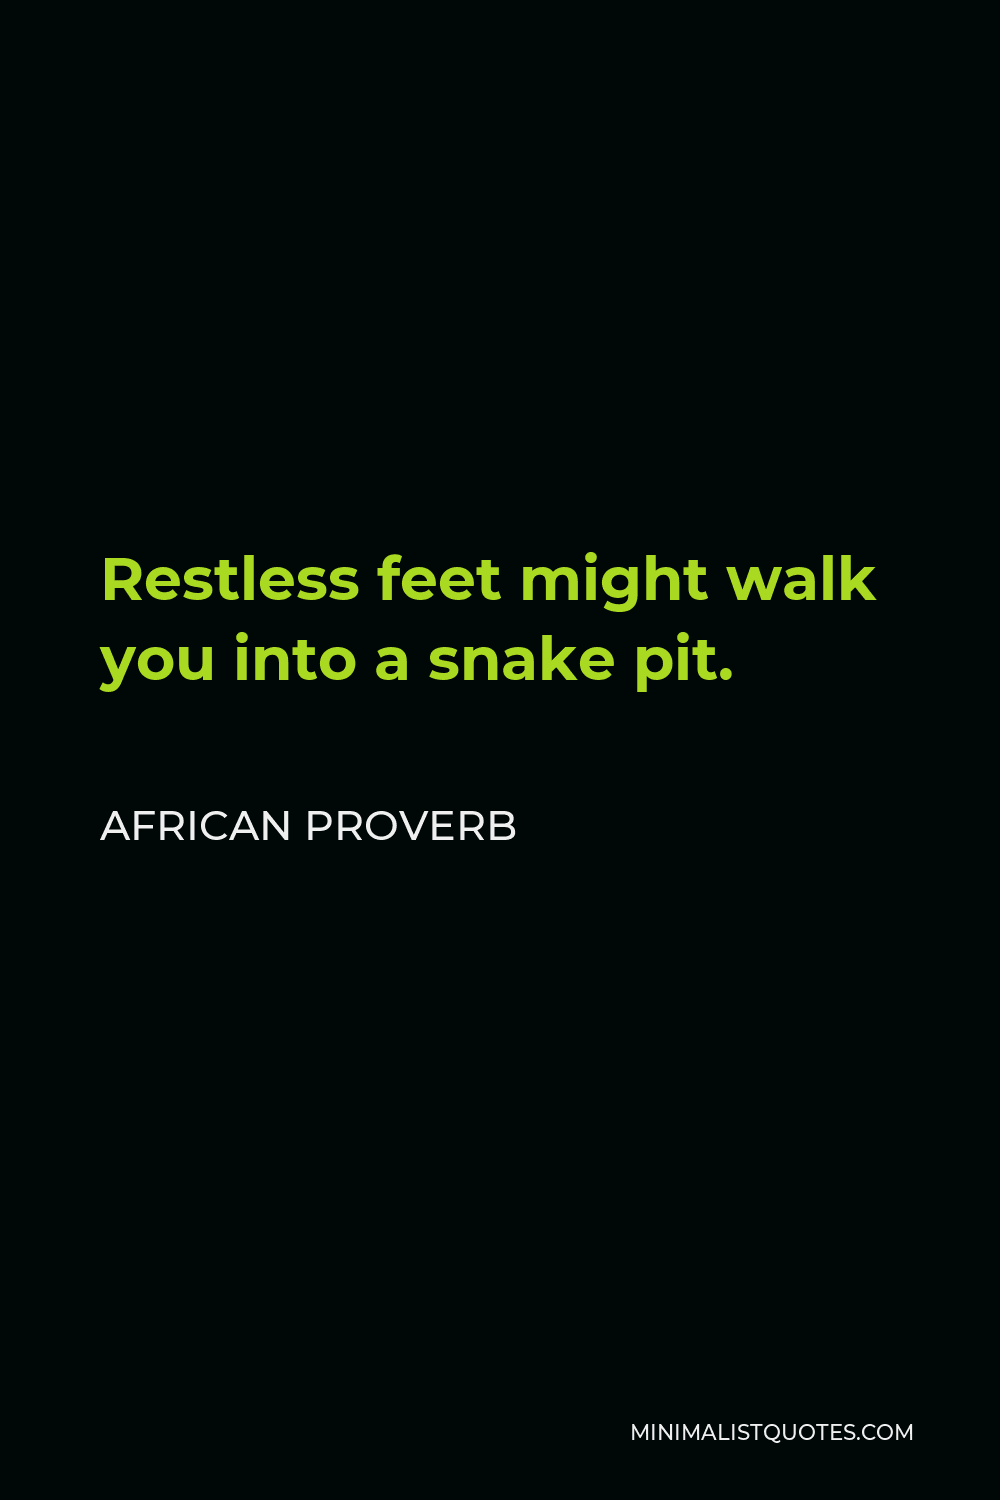 African Proverb Quote - Restless feet might walk you into a snake pit.